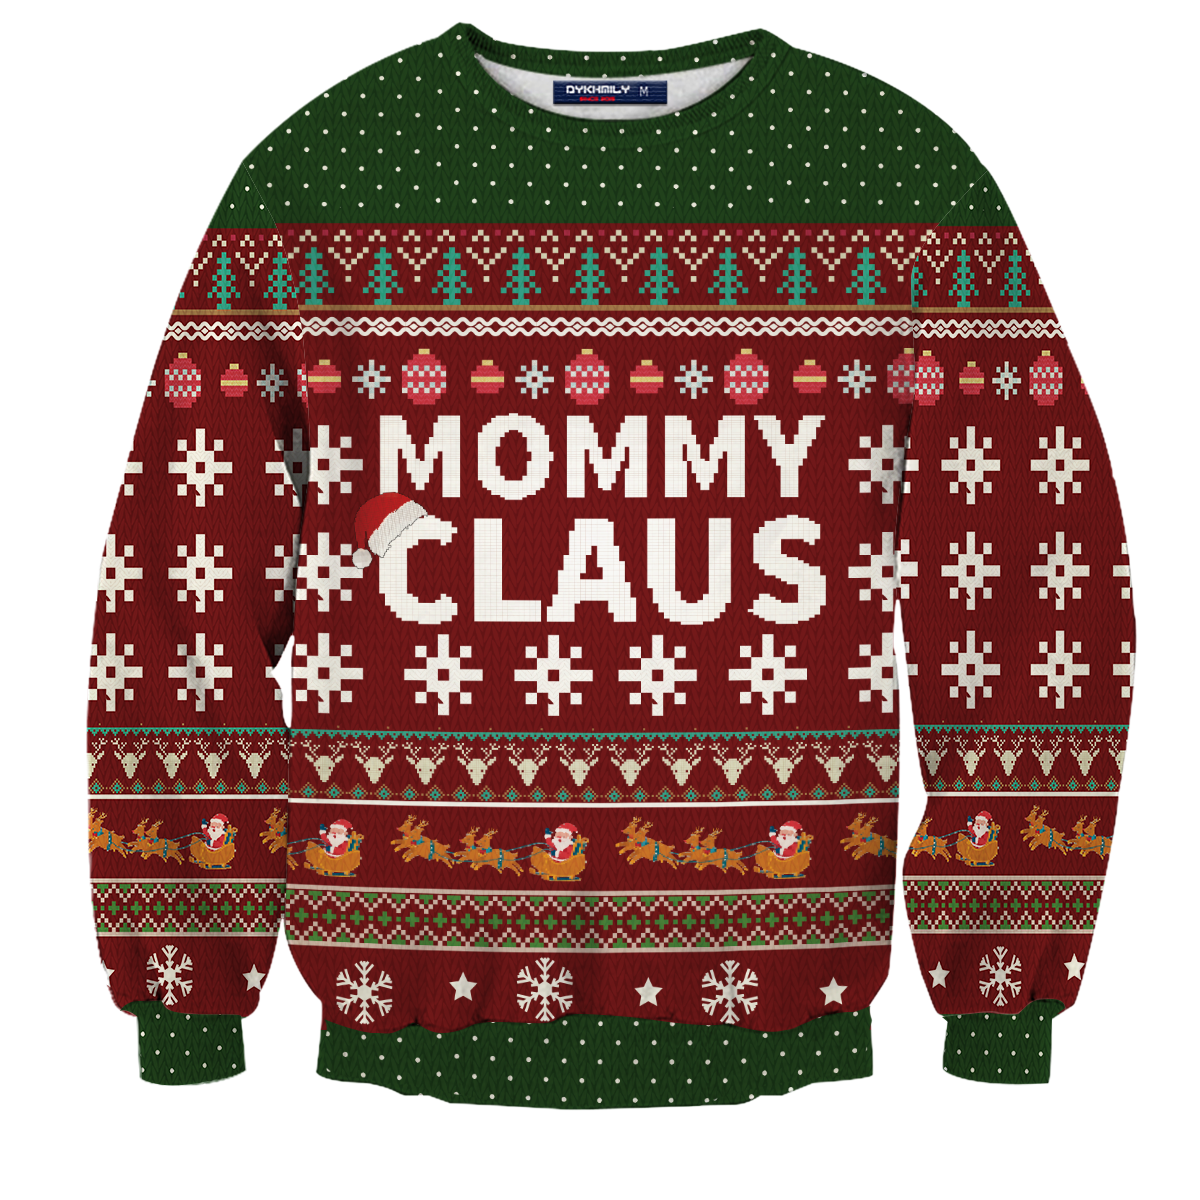 Mommy Claus Unisex Sweater